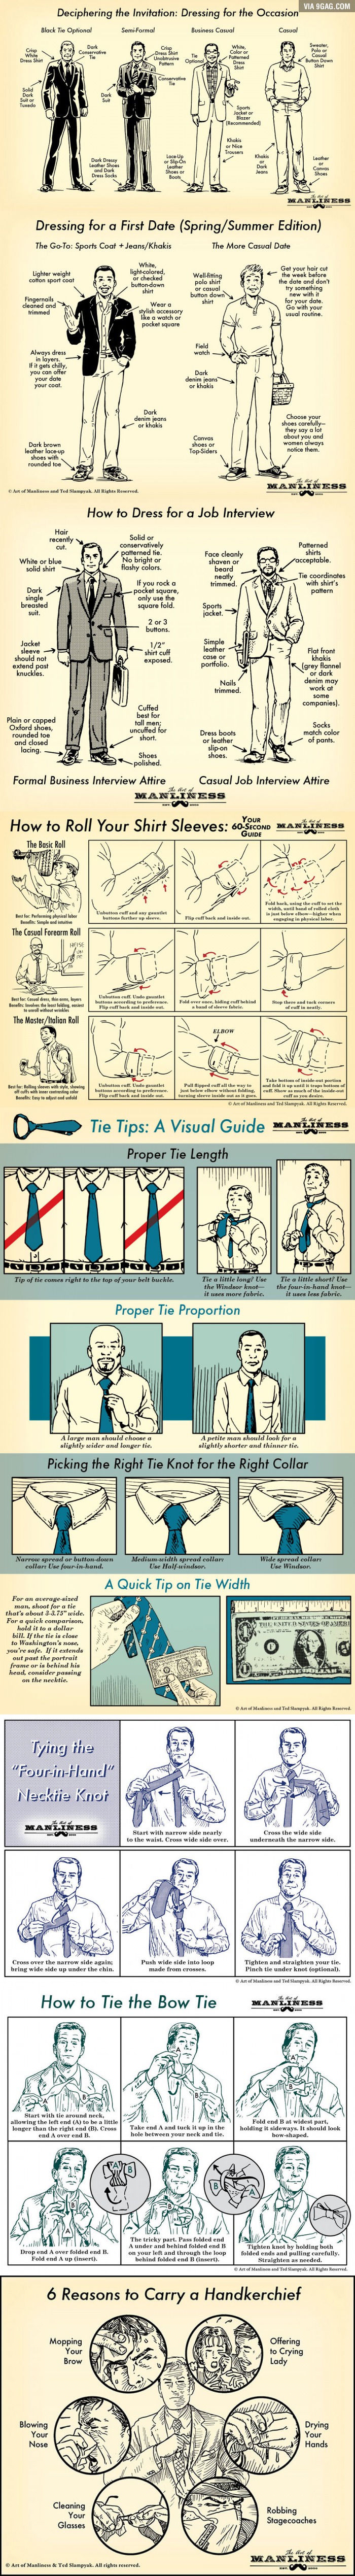 how to dress for men: a guide, how to, information graphic